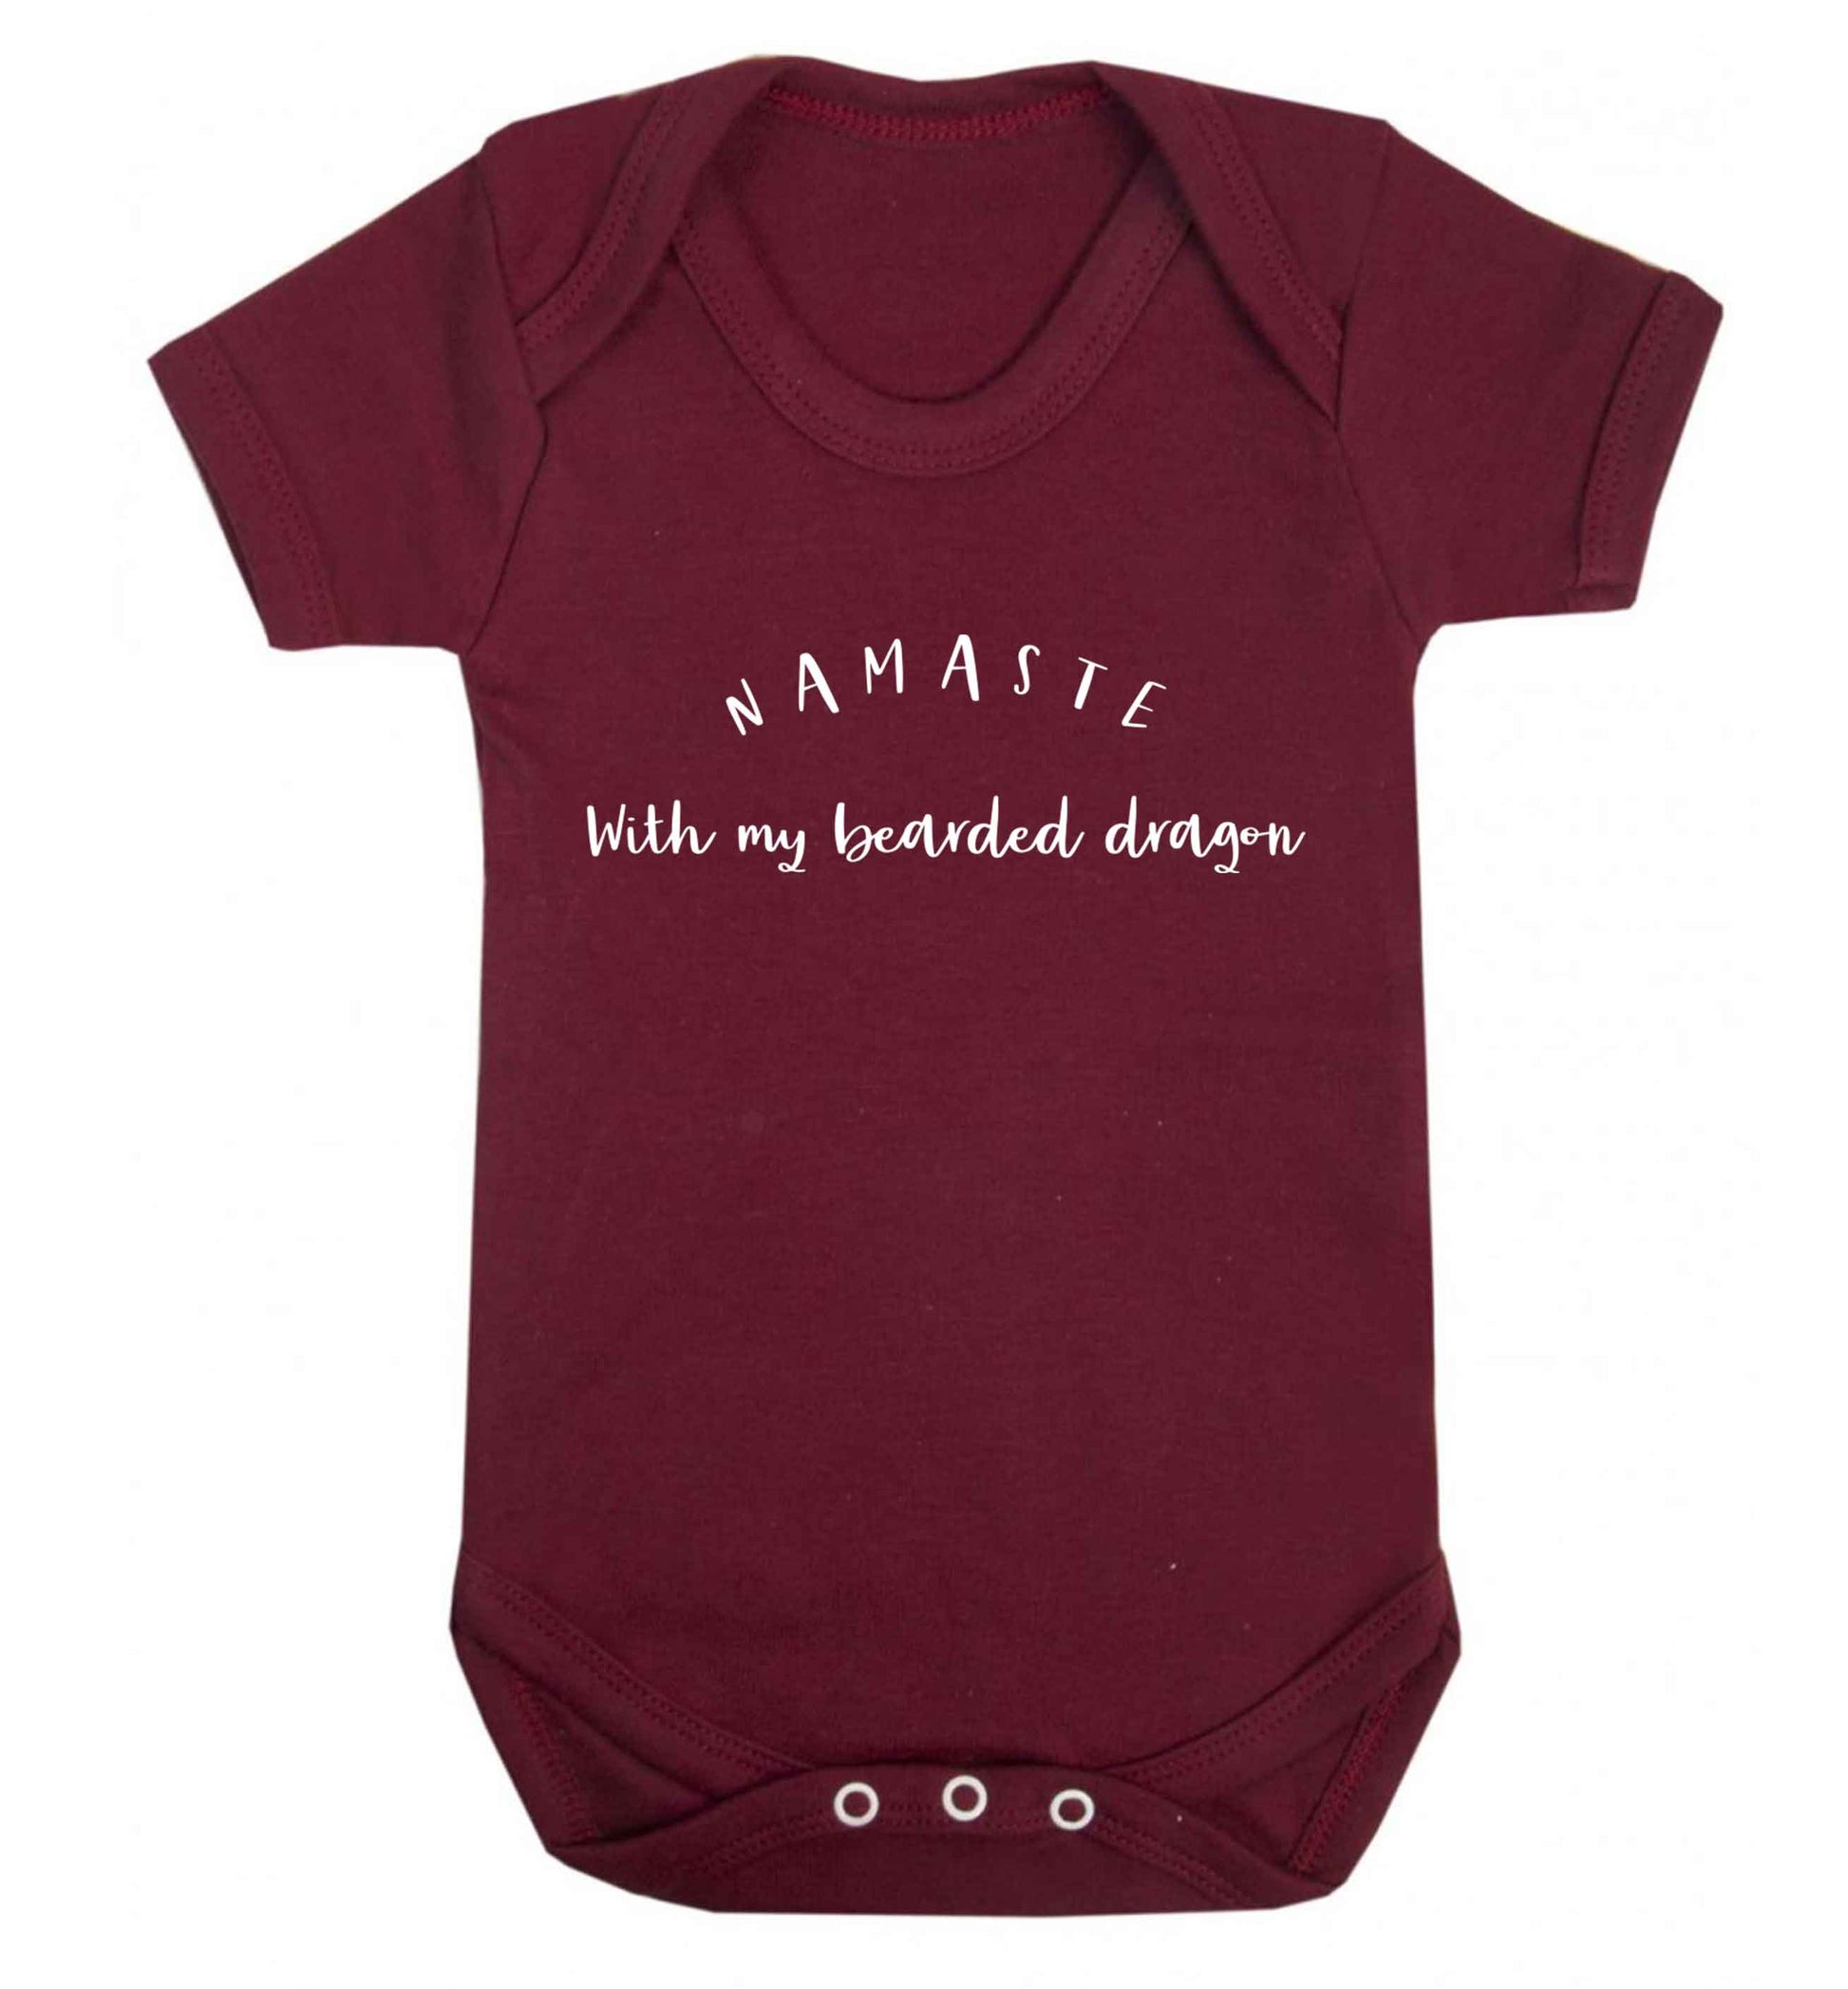 Namaste with my bearded dragon Baby Vest maroon 18-24 months